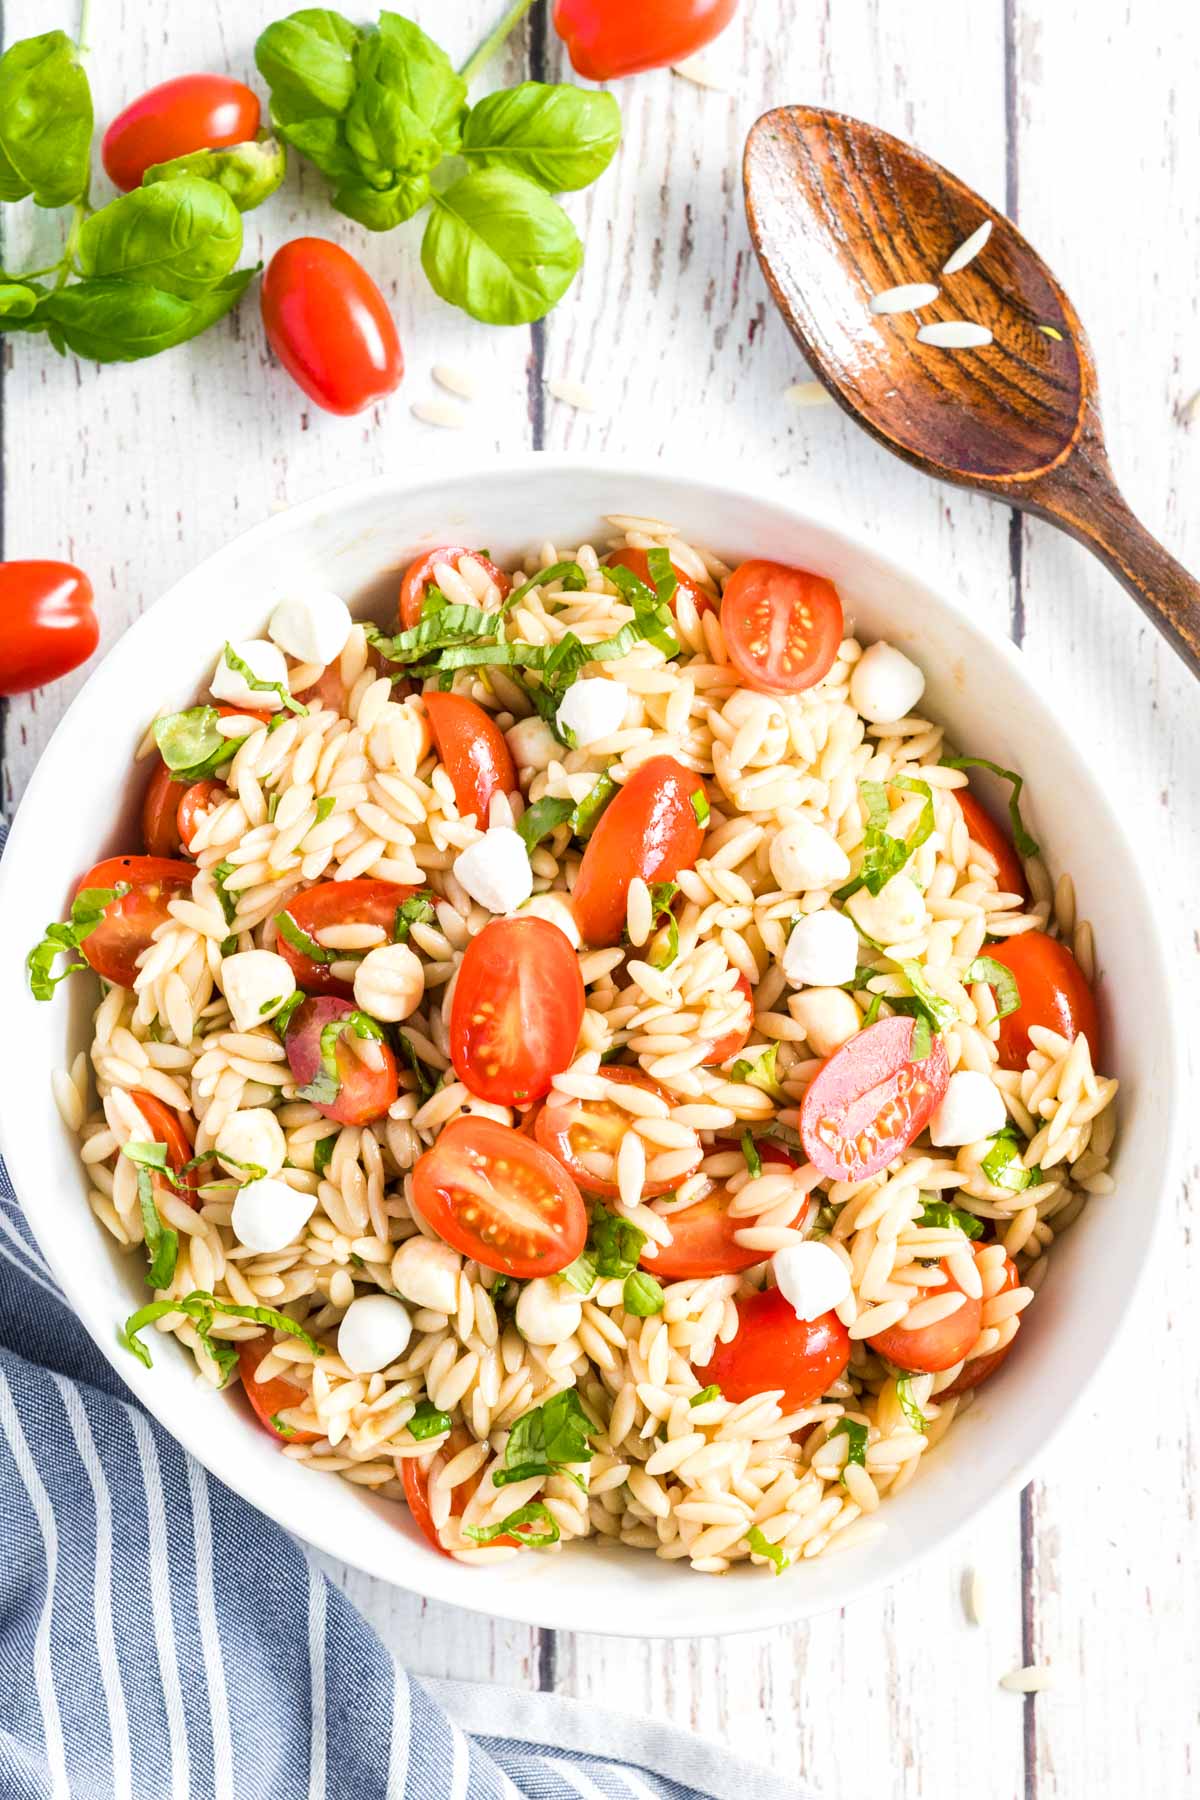 Caprese Orzo Salad in a white bowl with basil and tomatoes scattered around